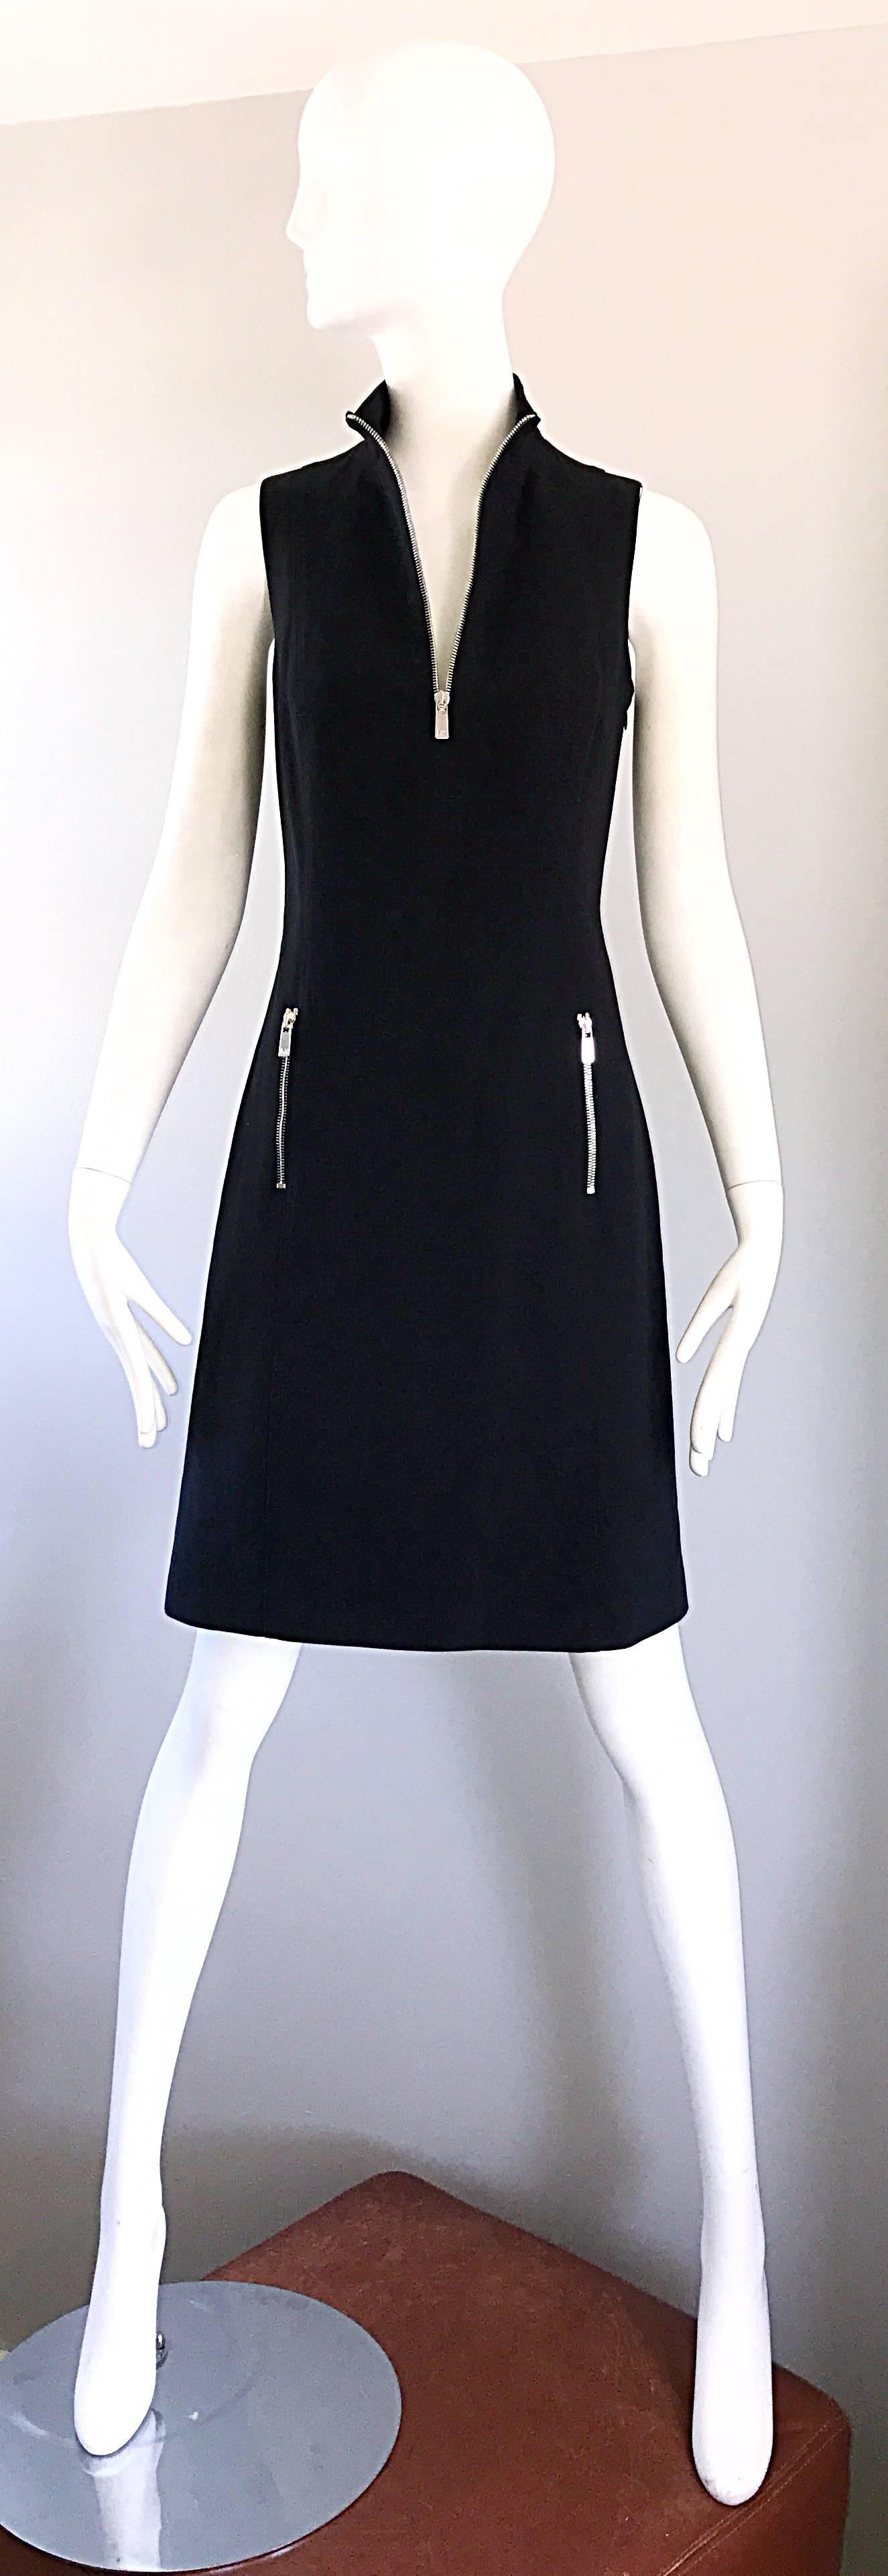 Brand new with tags MICHAEL KORS COLLECTION Runway black sheath dress! Functional silver zipper up the bodice, and at each side pocket. Stretch cotton flatters the body. Neck can be worn zipped up or left open. The perfect little black dress ( LBD )